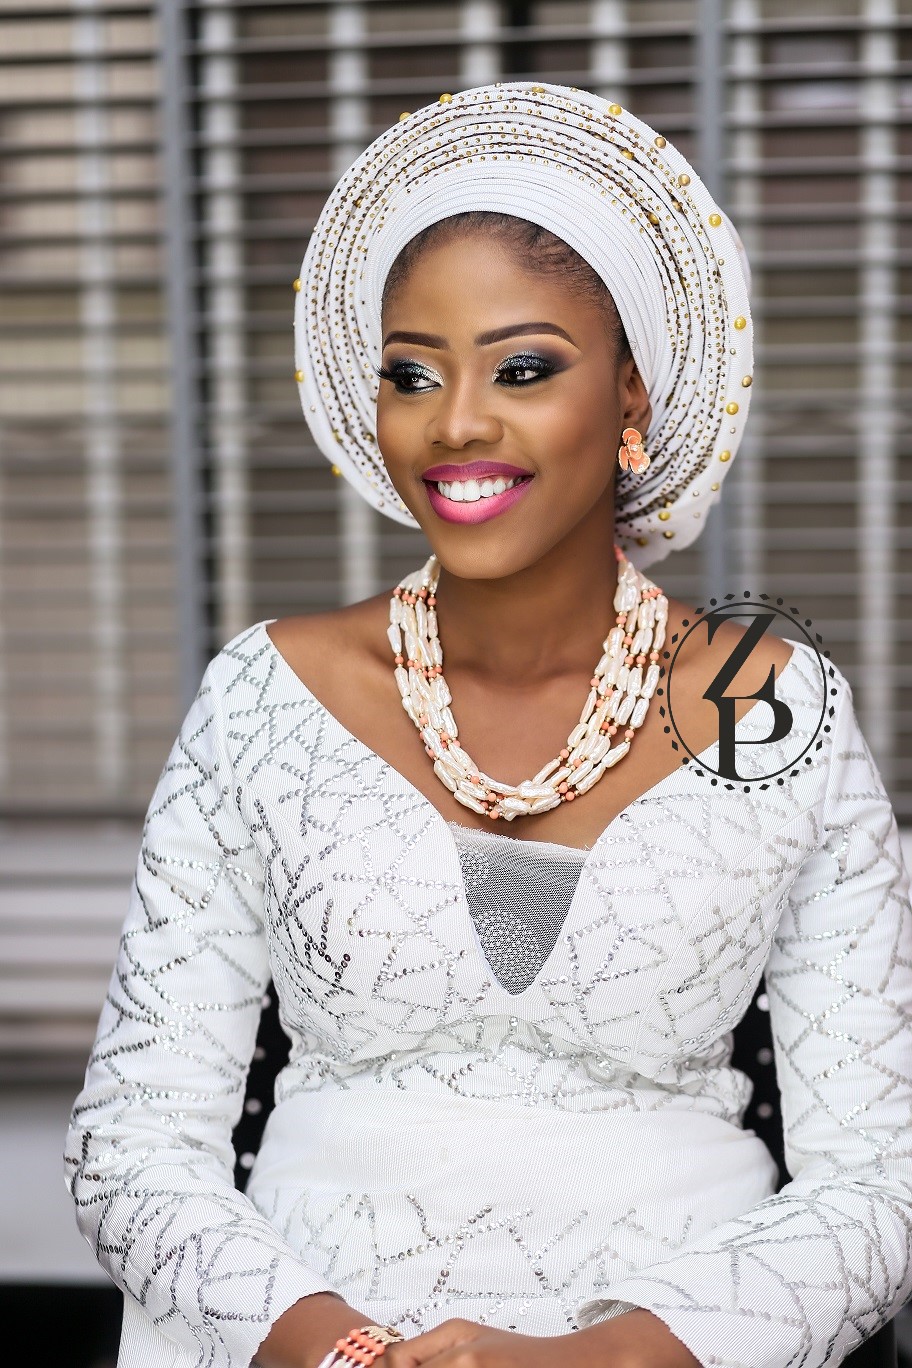 woman-in-yoruba-nigerian-traditional-outfit-pearl-and-coral-jewelry-gele.jpg